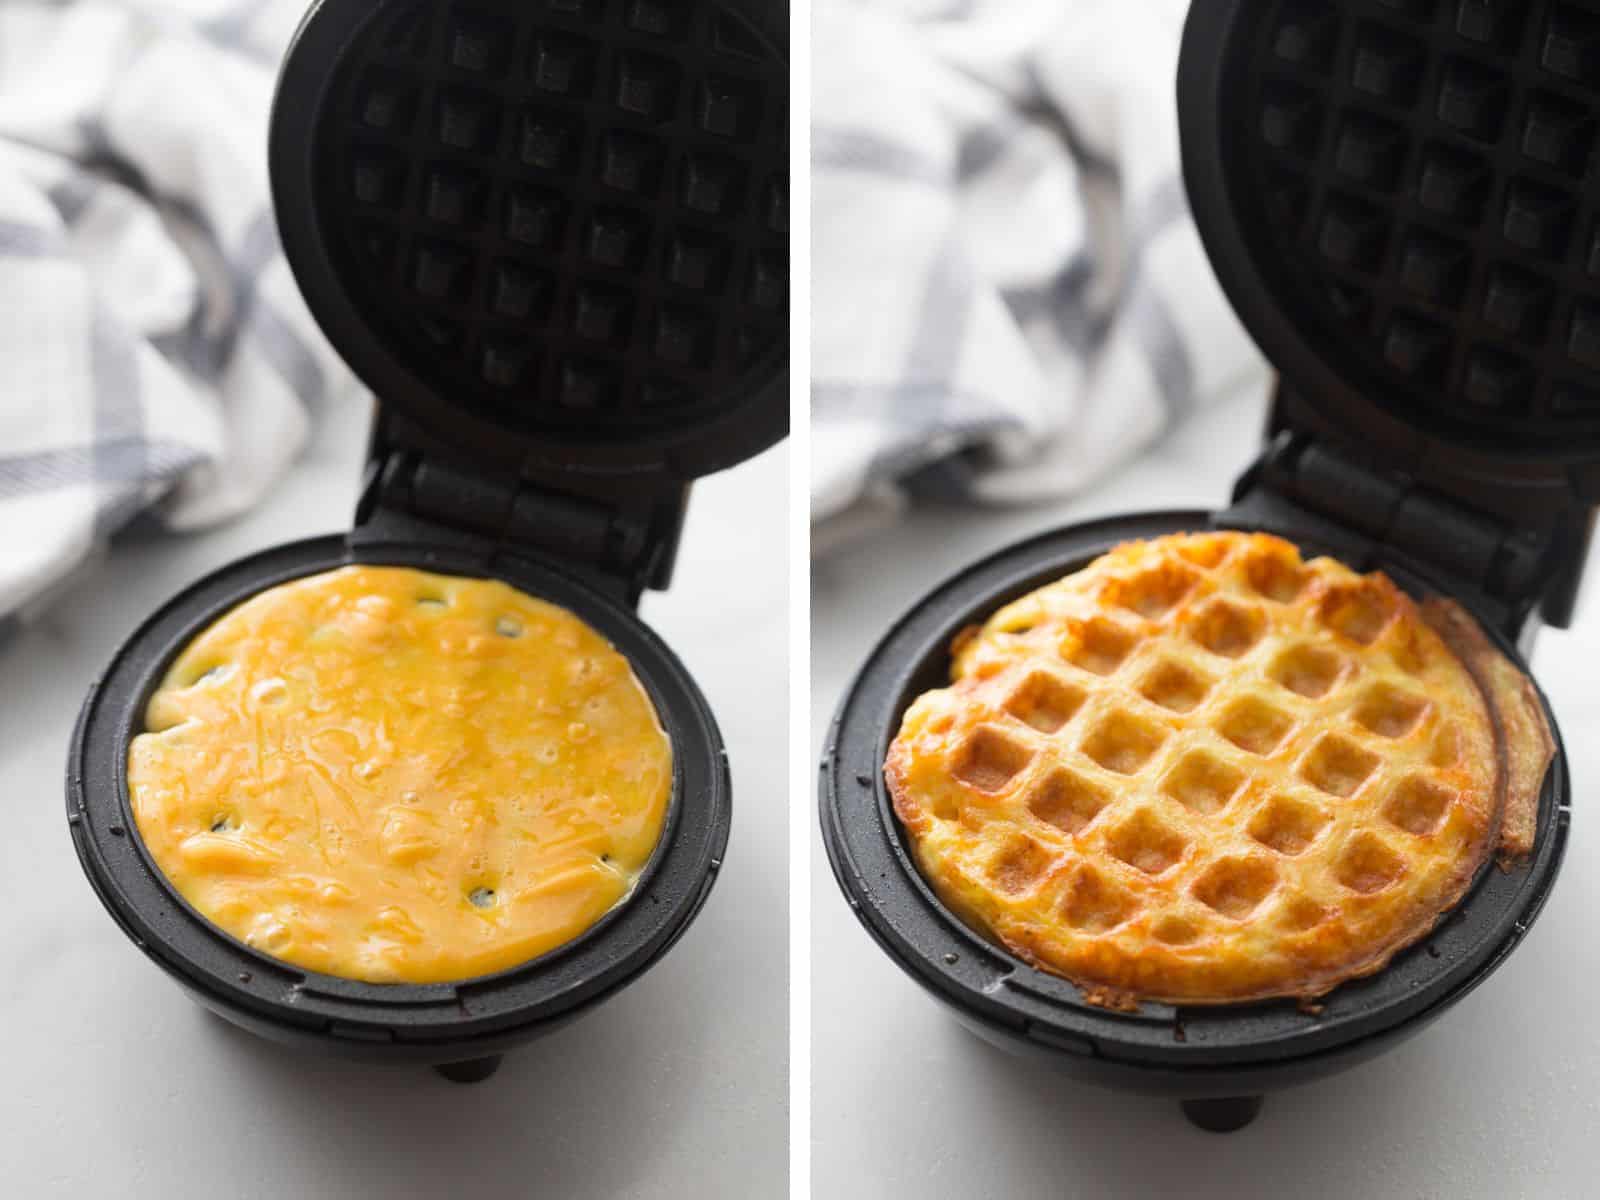 collage of chaffle batter in a waffle iron in one pic and a cooked chaffle in the dash mini maker in the other